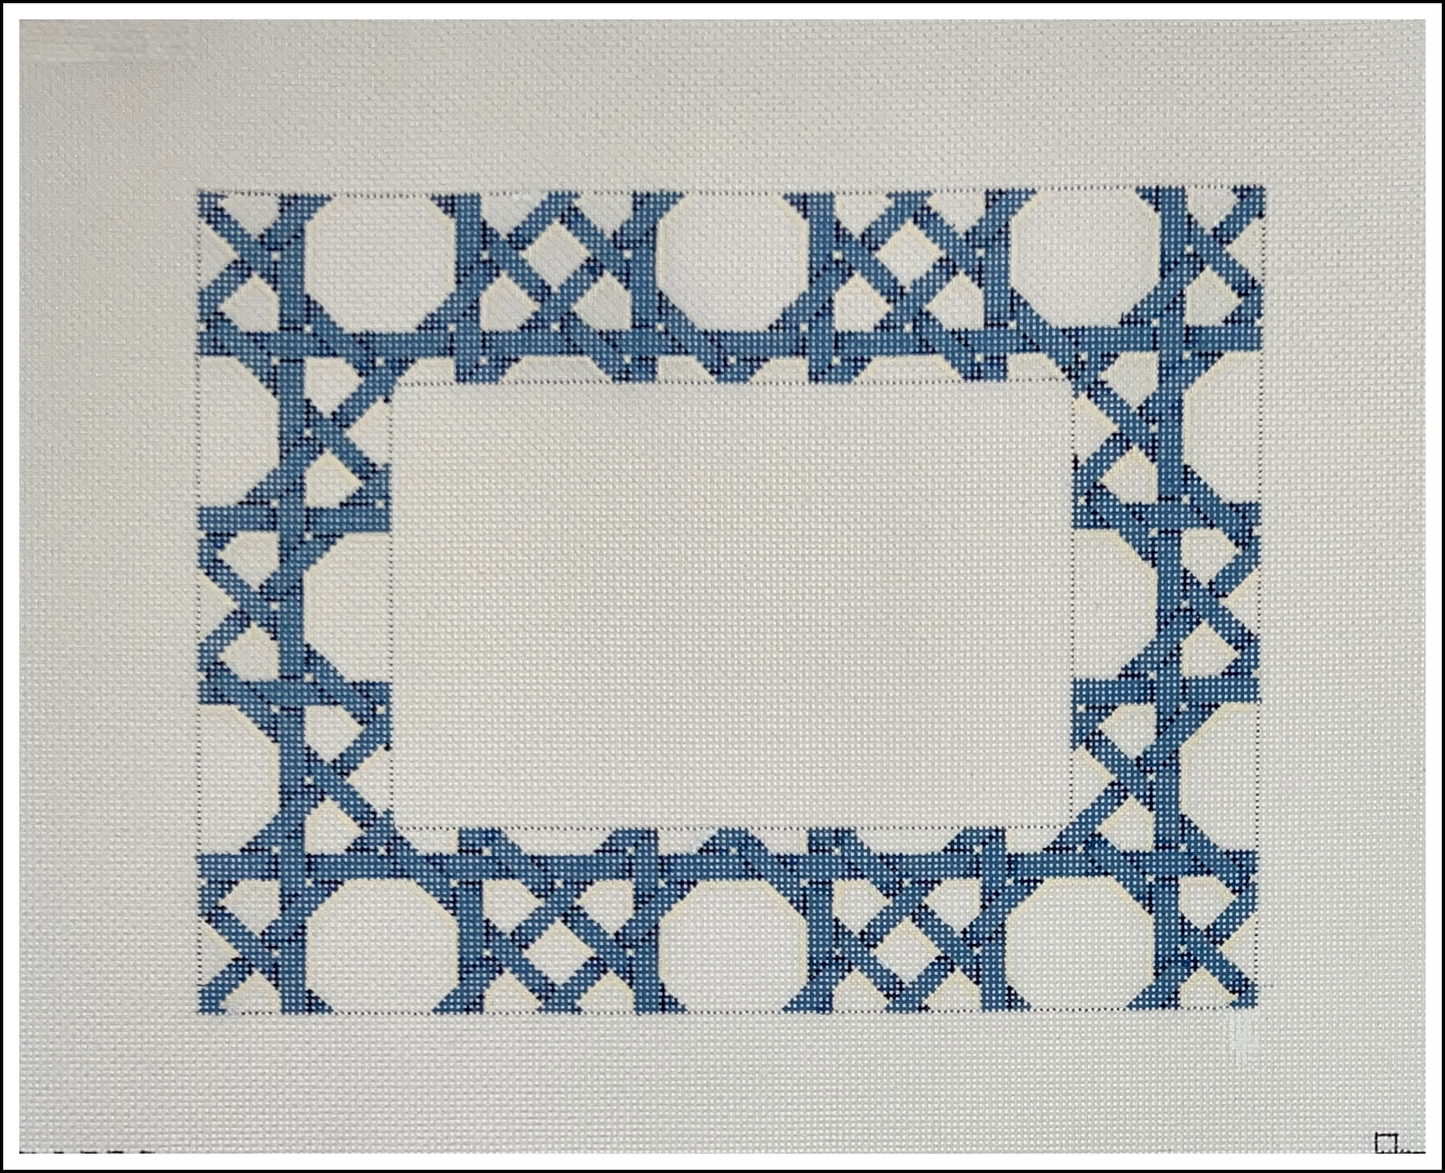 Blue Caning Pattern Frame